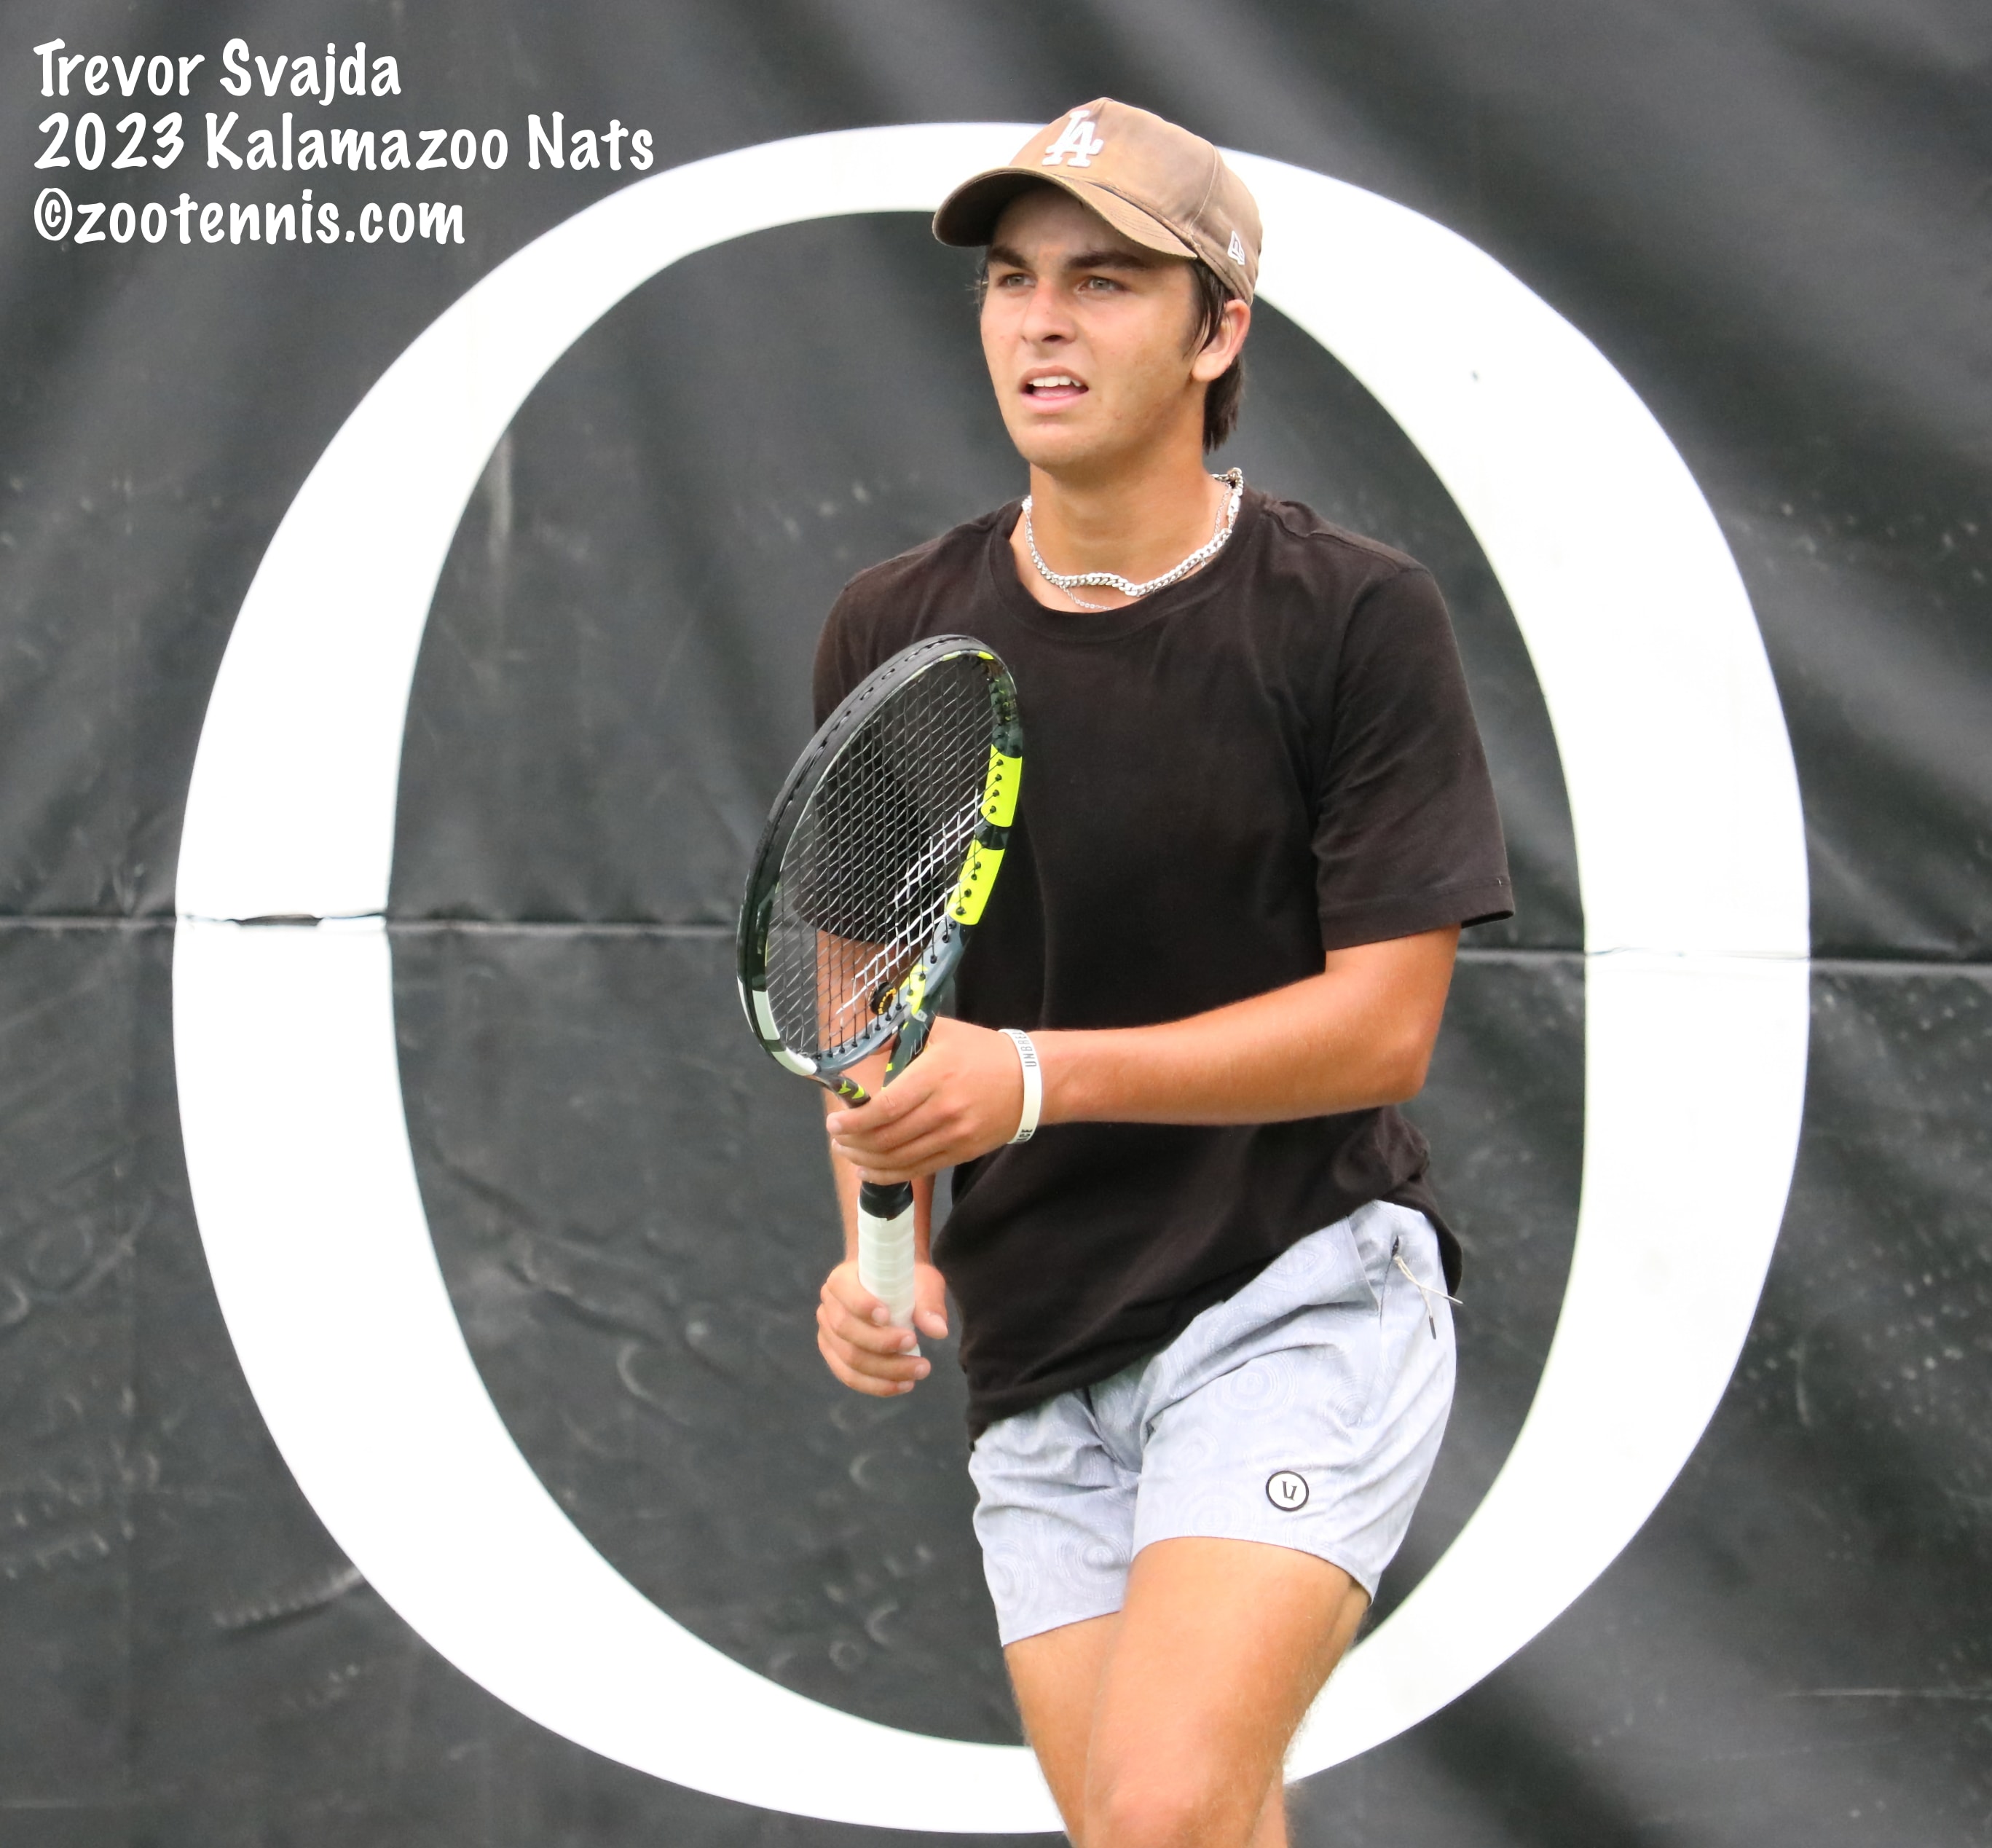 ZooTennis US Girls Defend Junior BJK Cup Title Against Czech Republic Sunday; Svajda Starting at SMU in January; Kudla Versus Michelsen in Knoxville; Navarro Advances at Charleston $100K; All Texas Final at